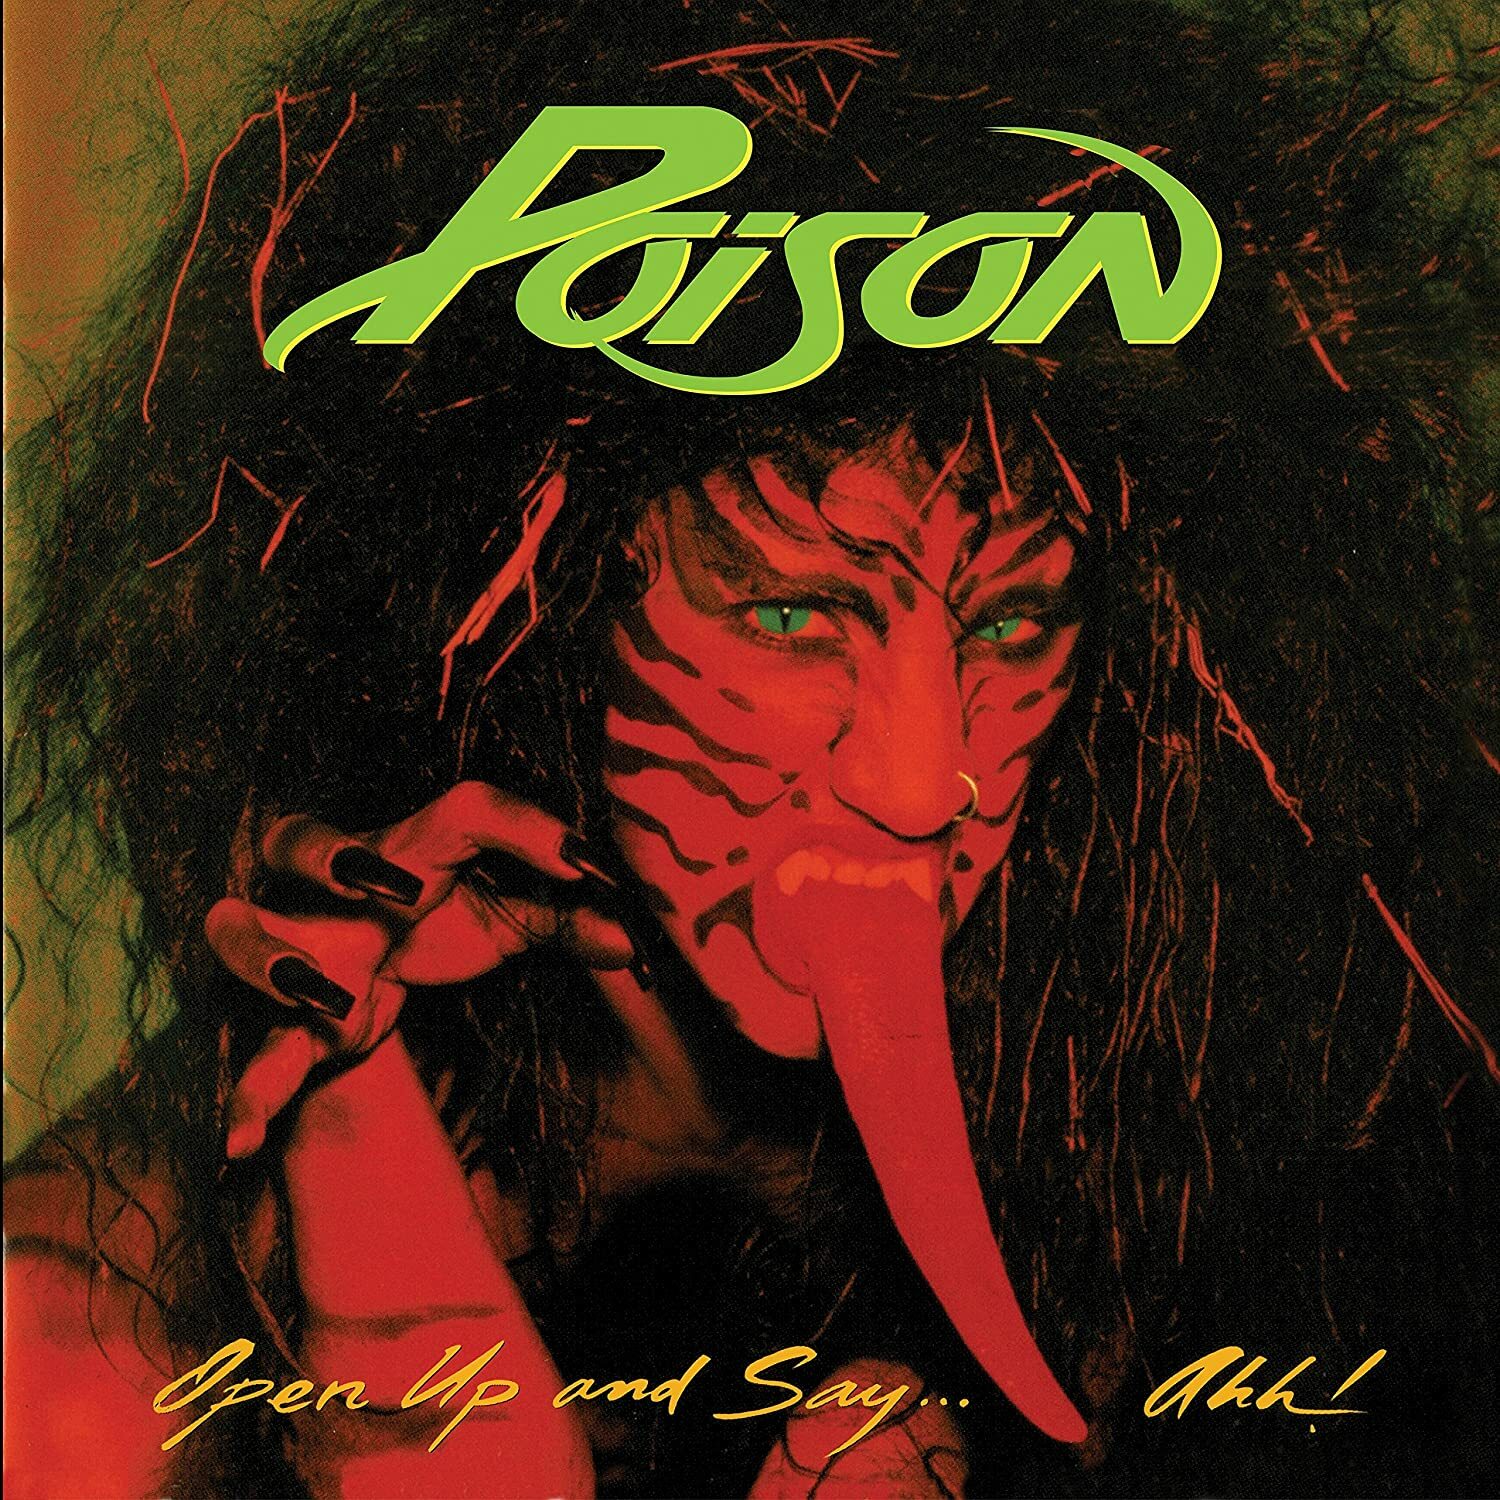 Vinil - Poison - Open Up and Say,,, Ahh!